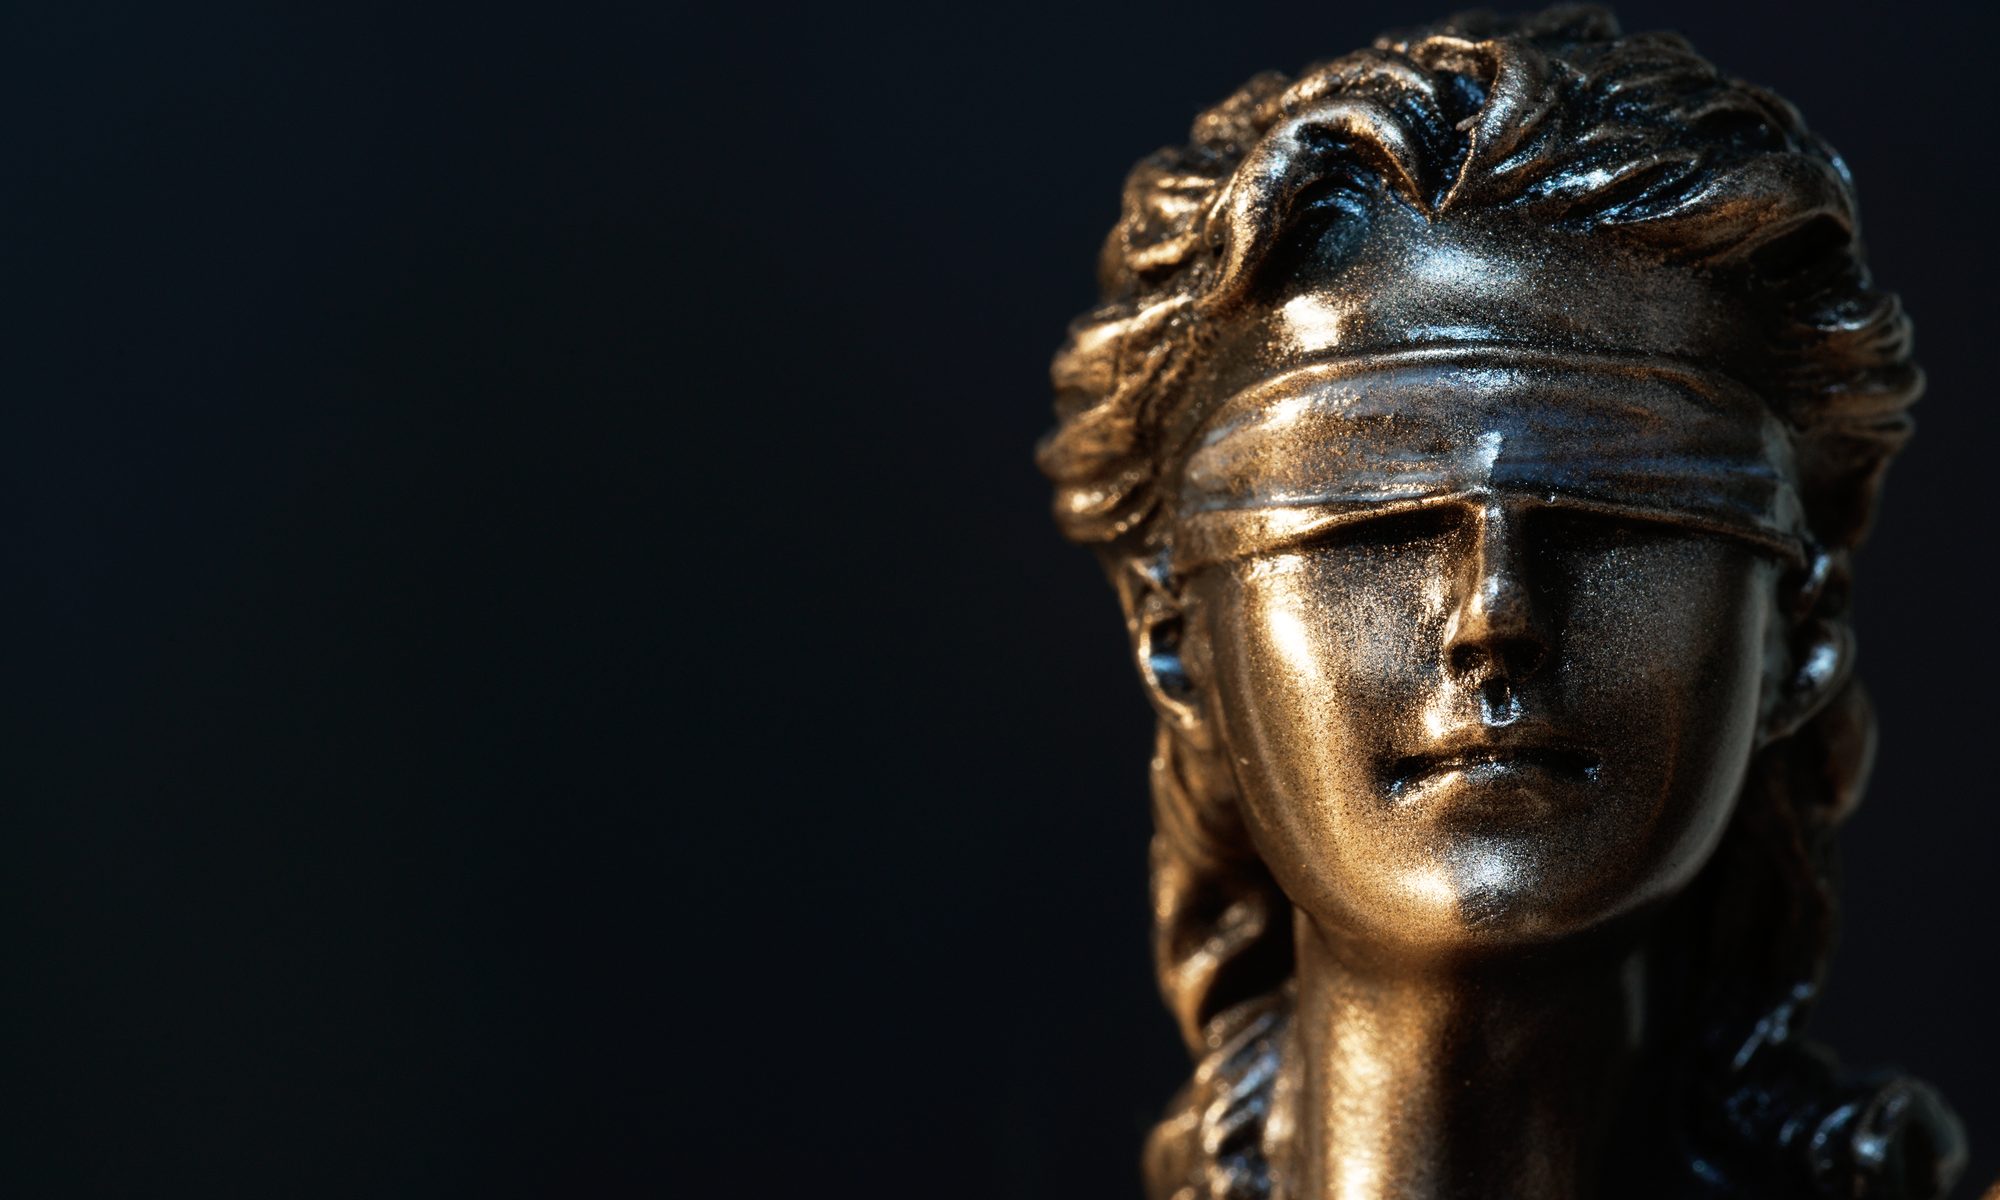 close-up photograph of Lady Justice statue's blindfolded face